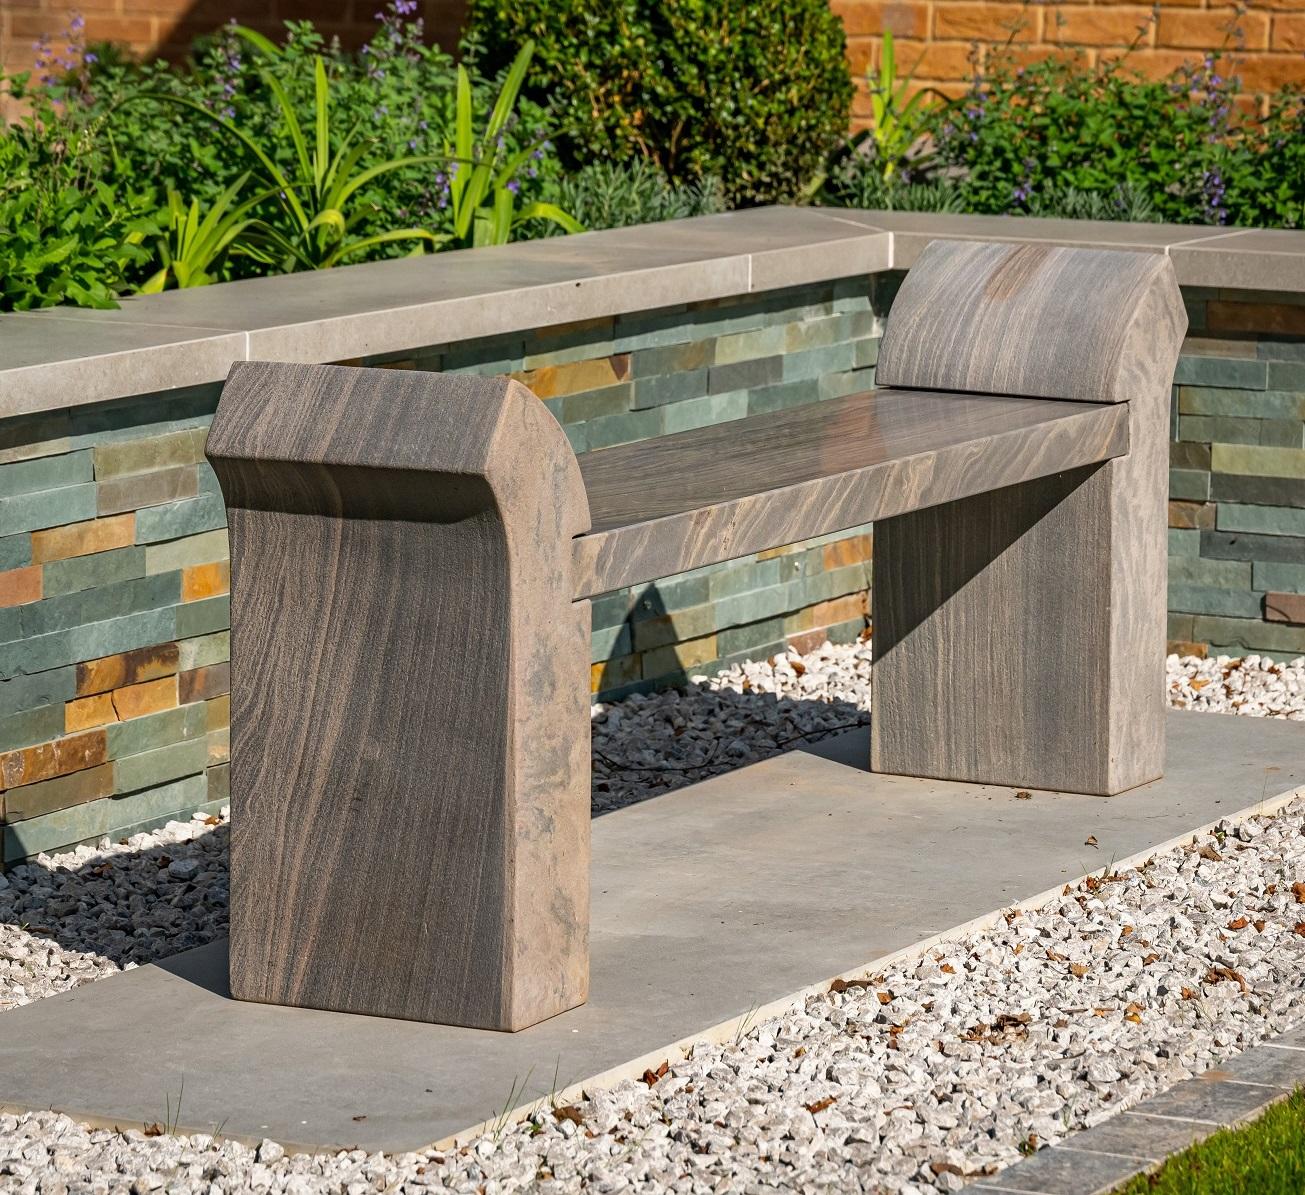 stone bench in garden shark grey natural sandstone with curved arms